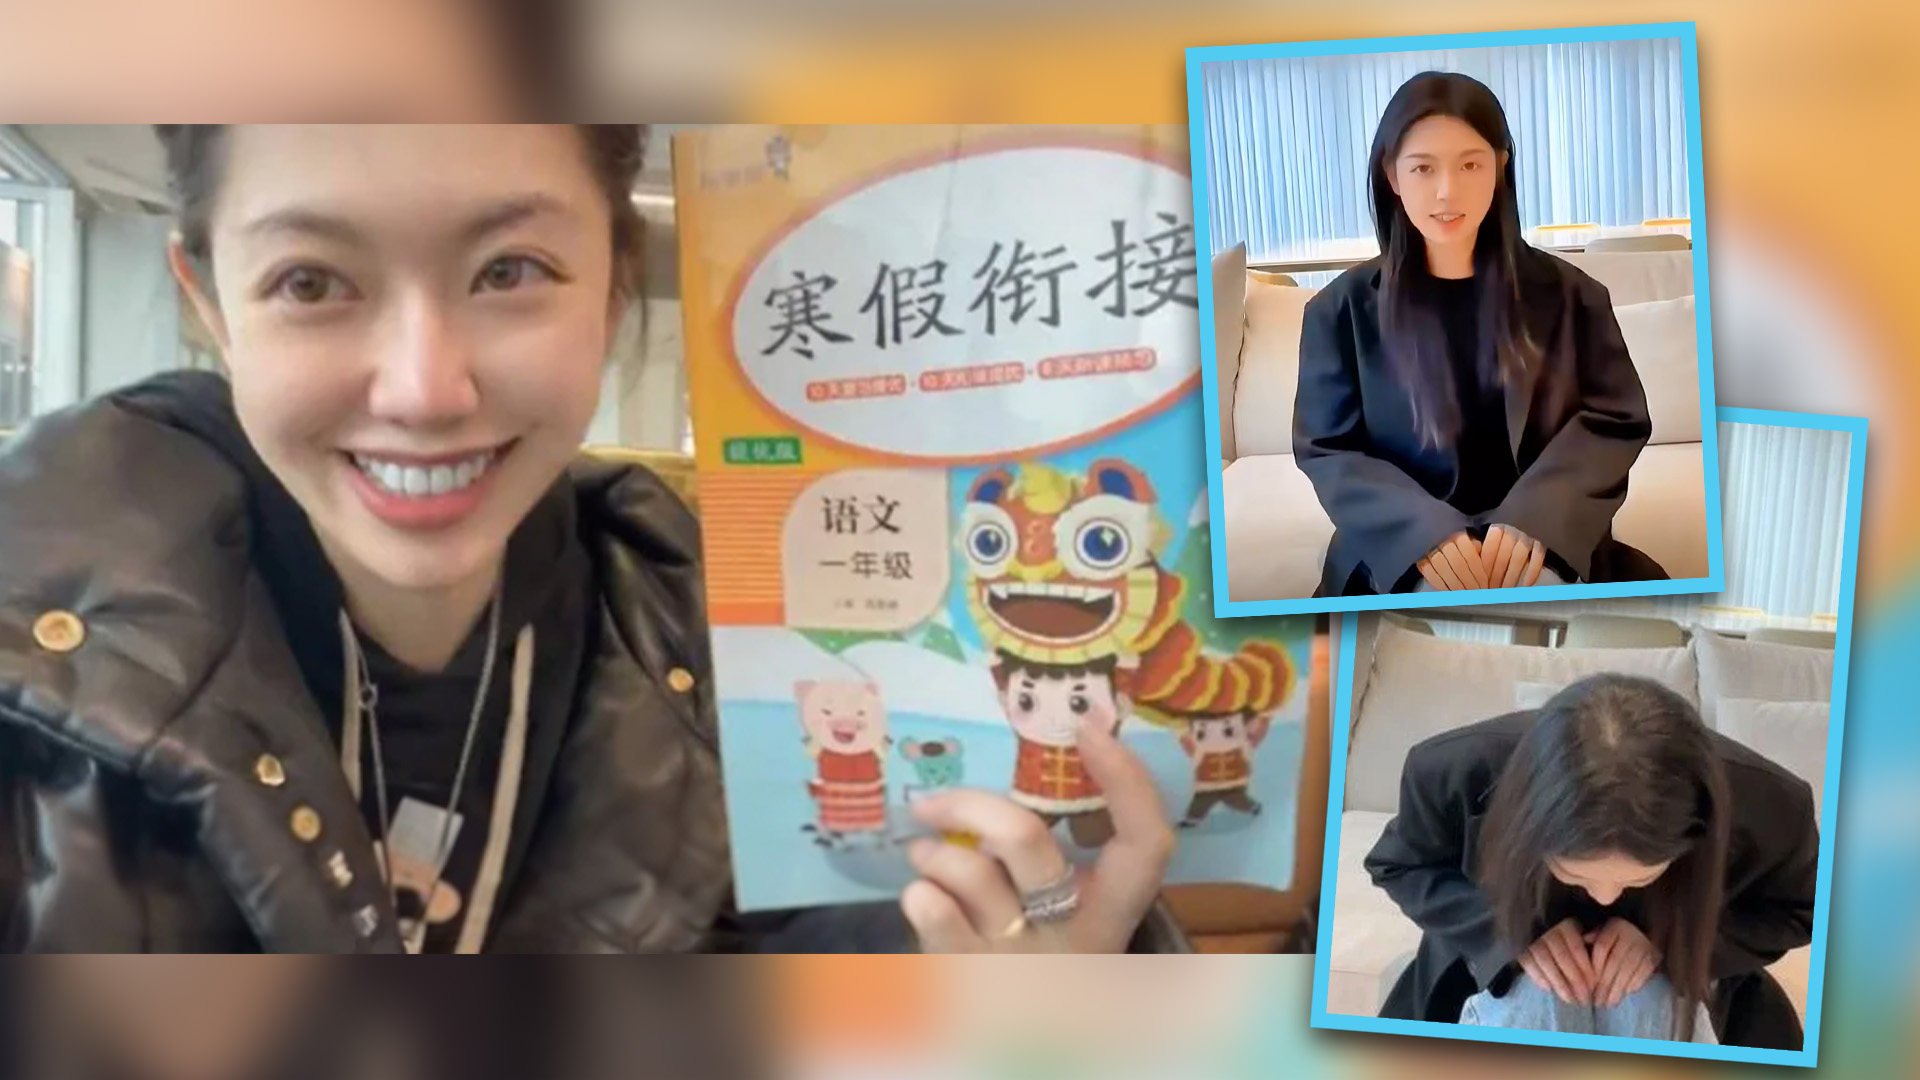 An online influencer in China with 19 million fans, whose social media account has been shut down over fabricated video content she posted to boost her internet profile, has apologised. Photo: SCMP composite/Douyin